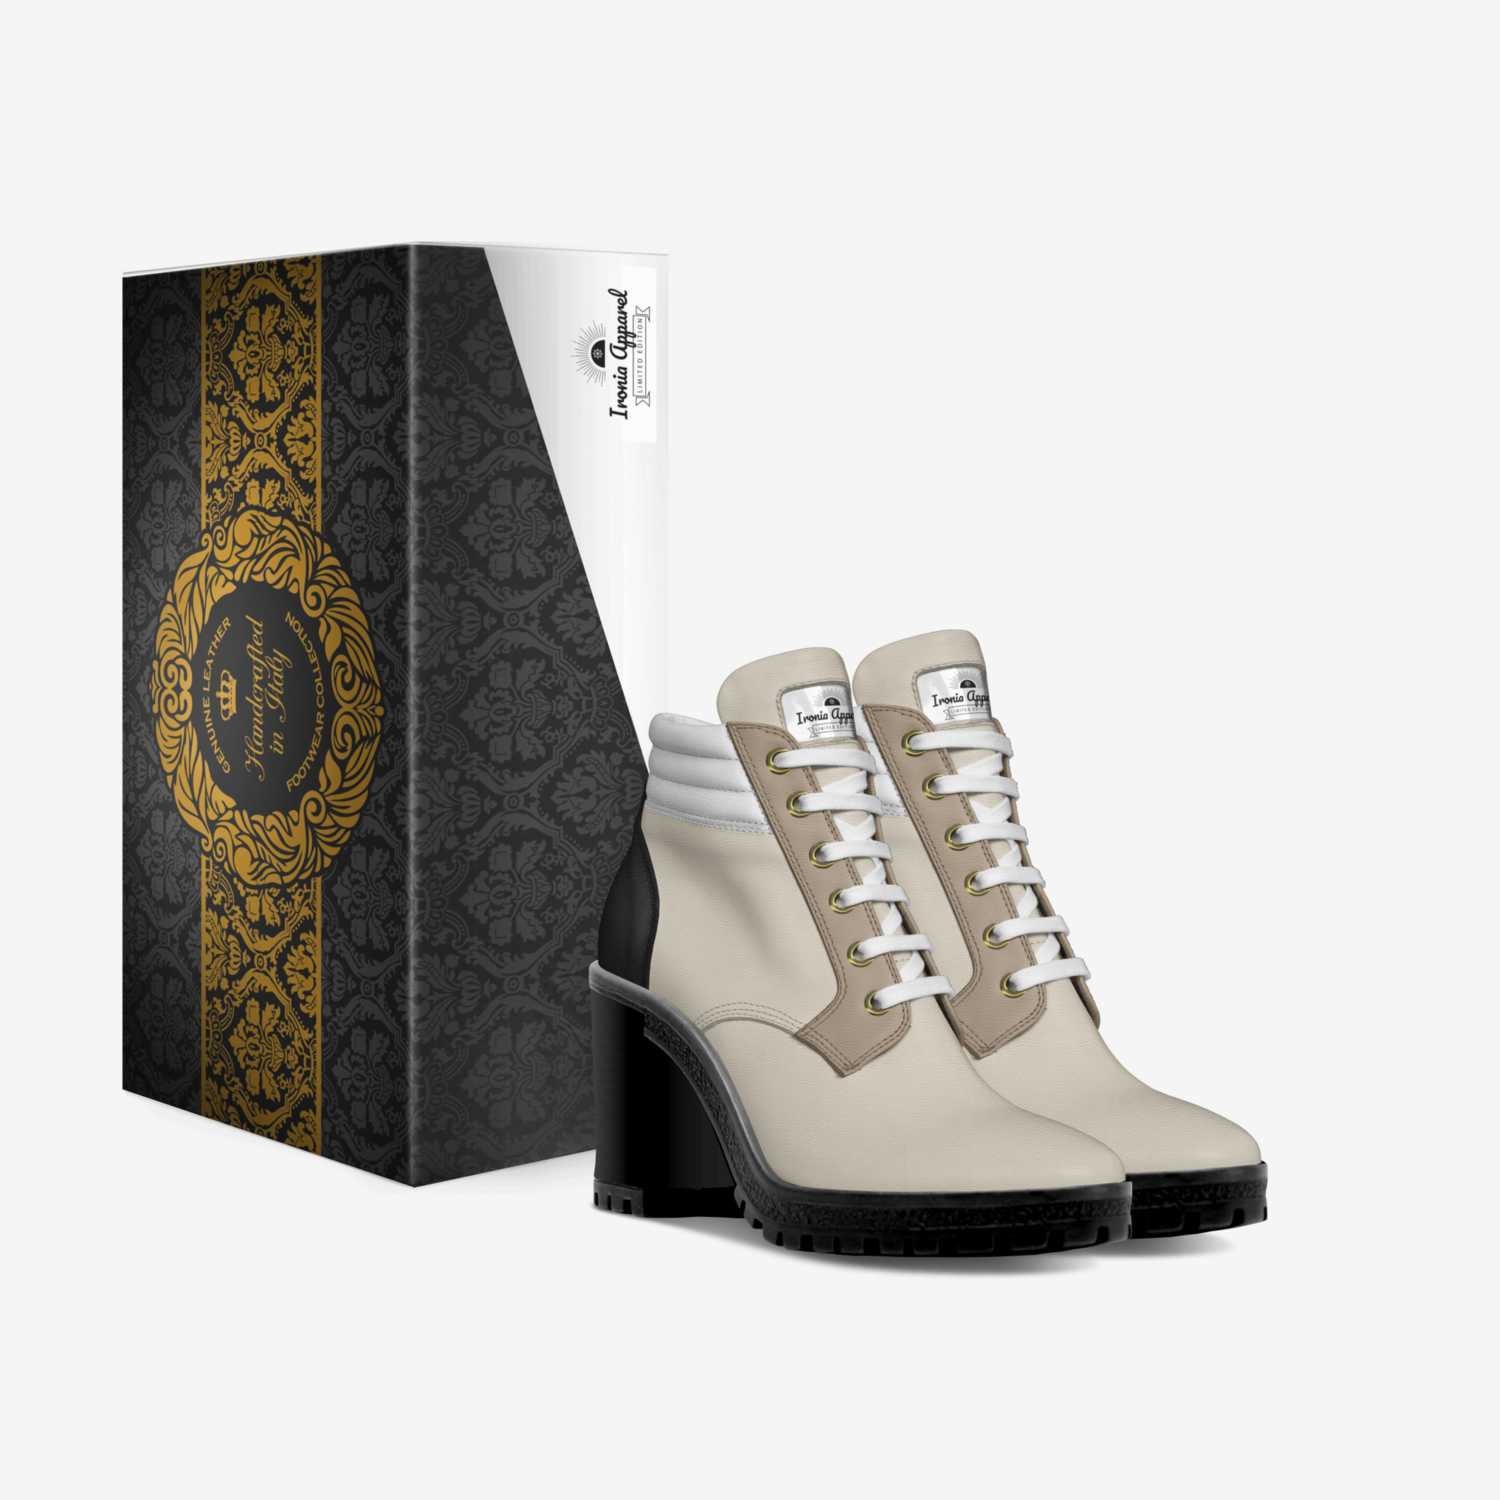 Ironia Apparel custom made in Italy shoes by Dean Blackwell | Box view